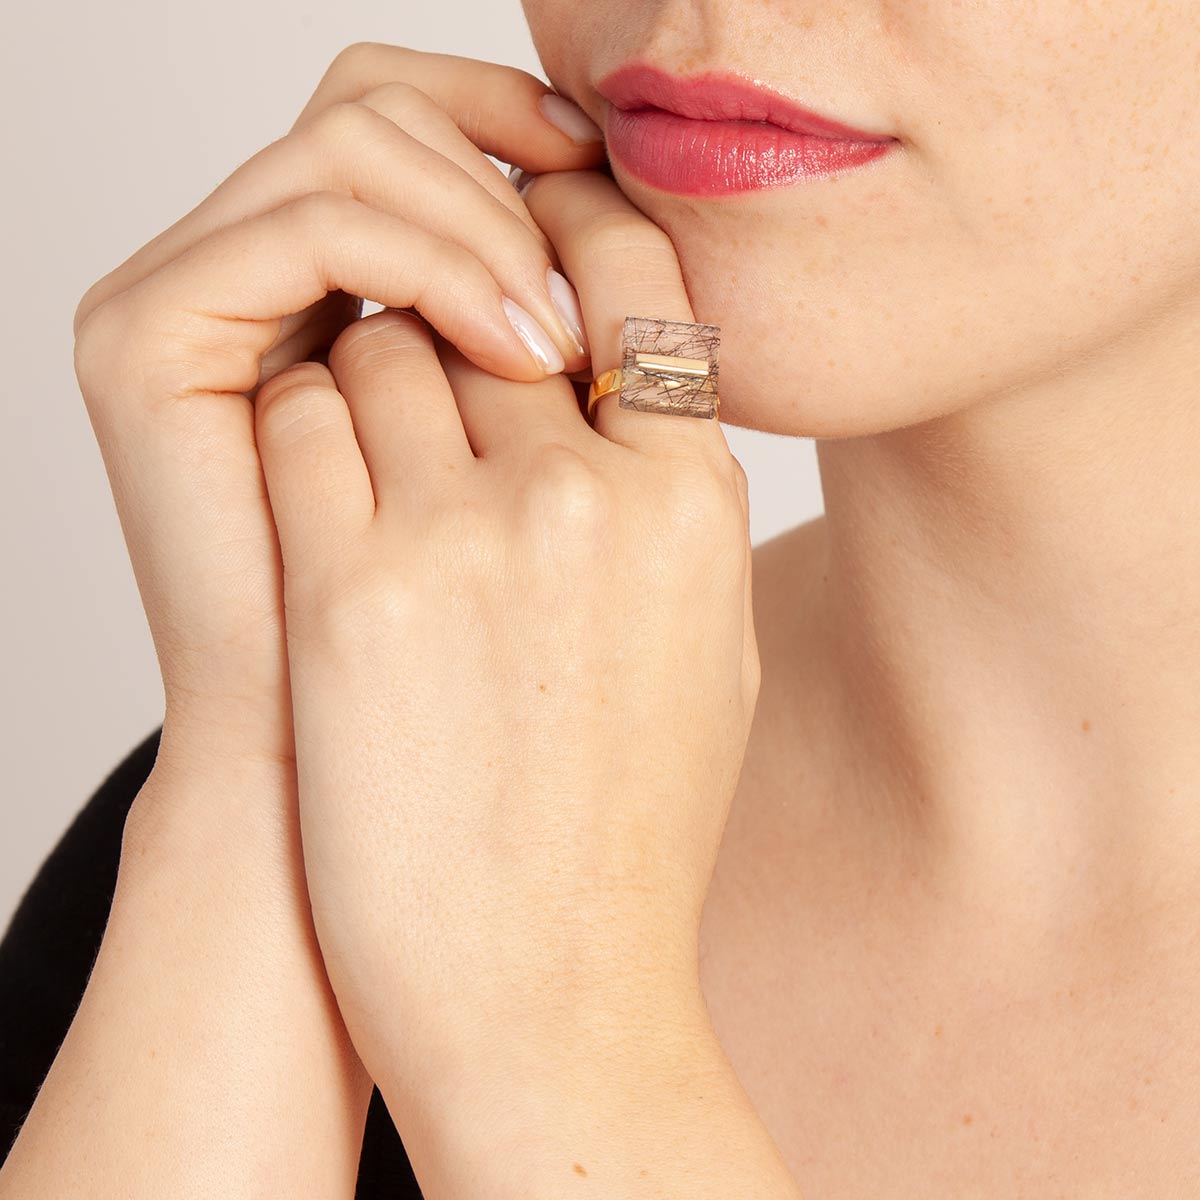 Fek handmade ring in 925 silver plated in 18k gold and tourmaline quartz in a model designed by Belen Bajo